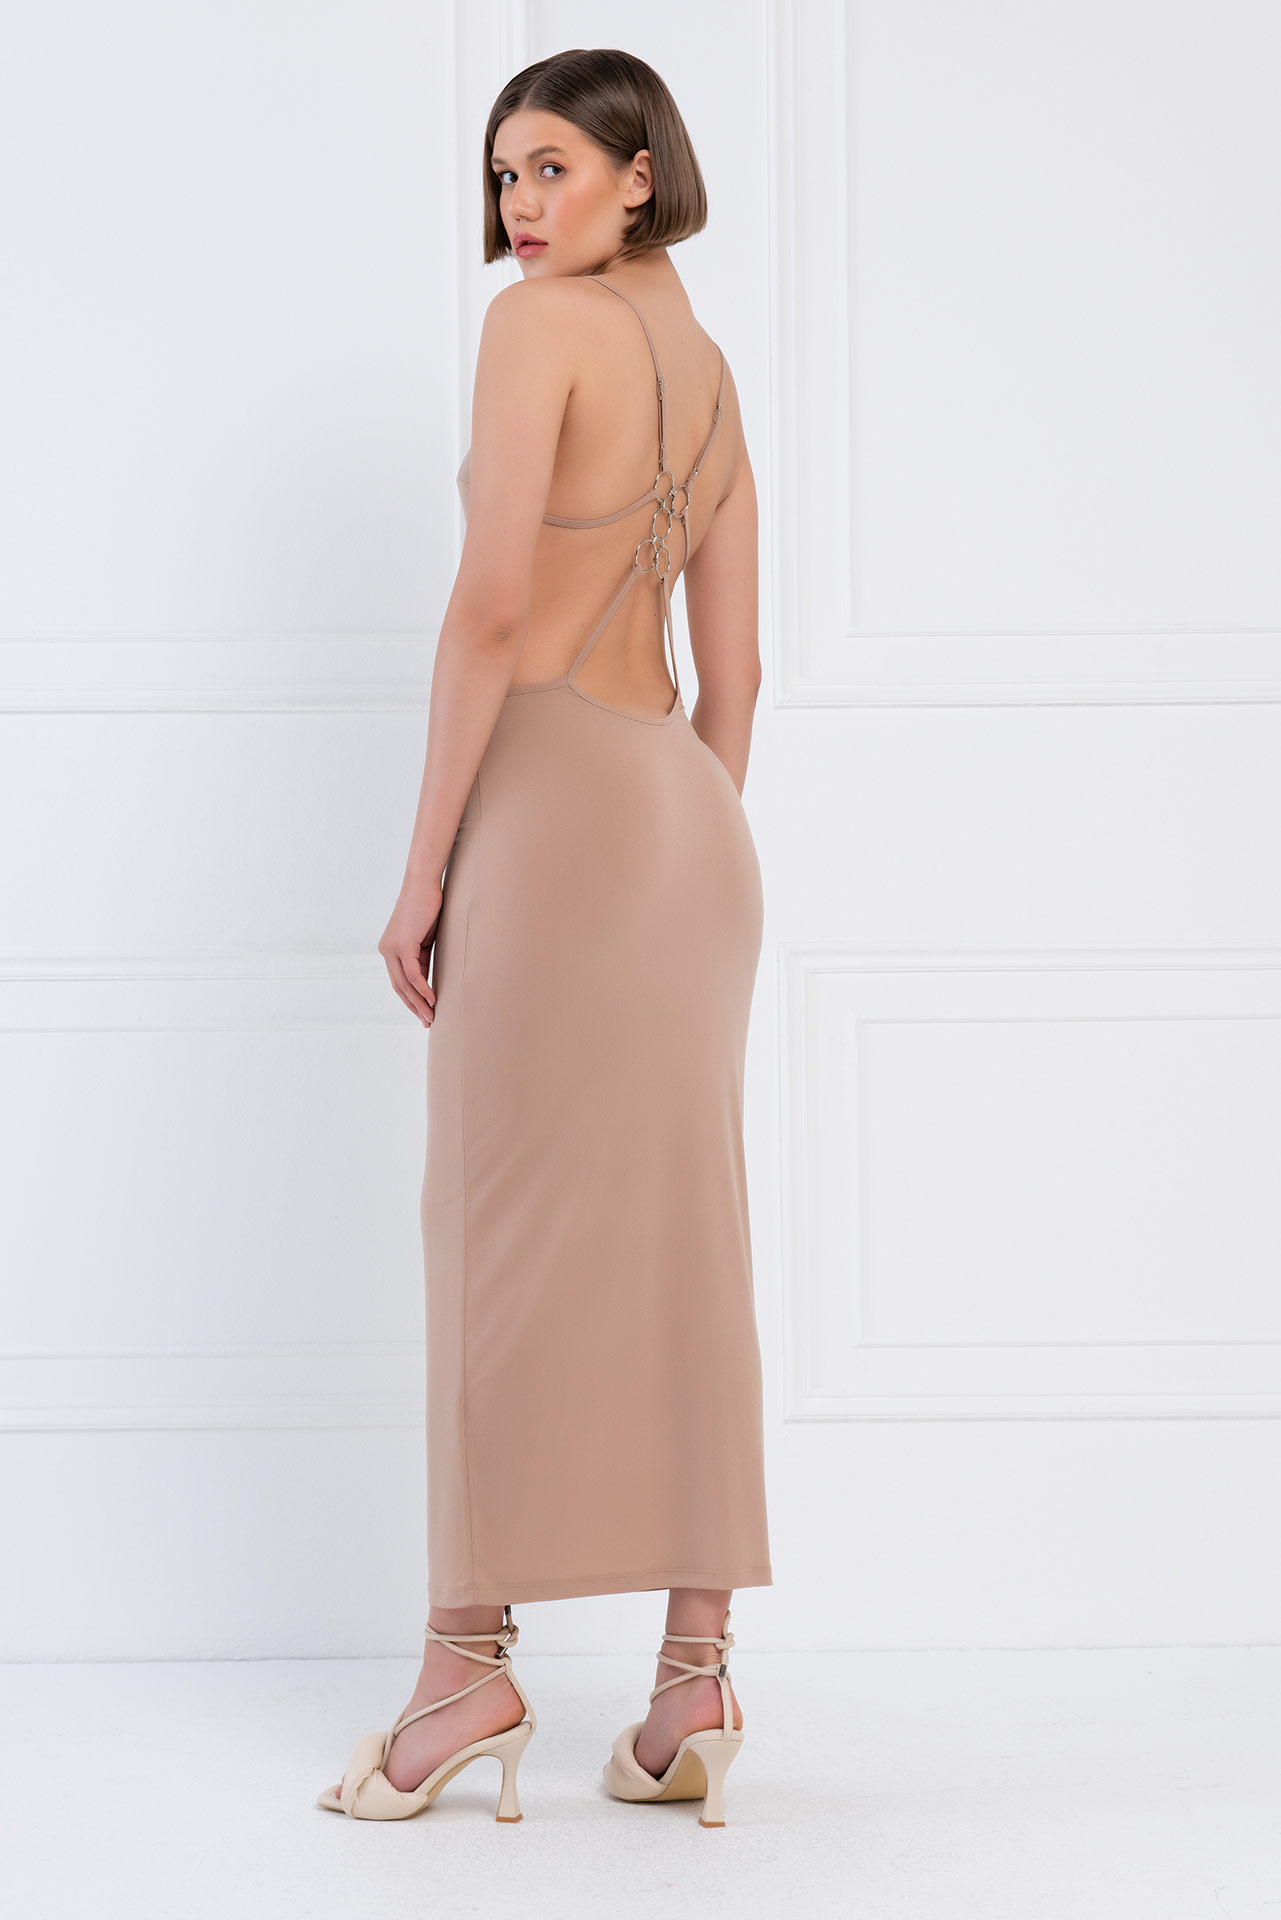 Wholesale Sand Backless Cut Out Maxi Dress